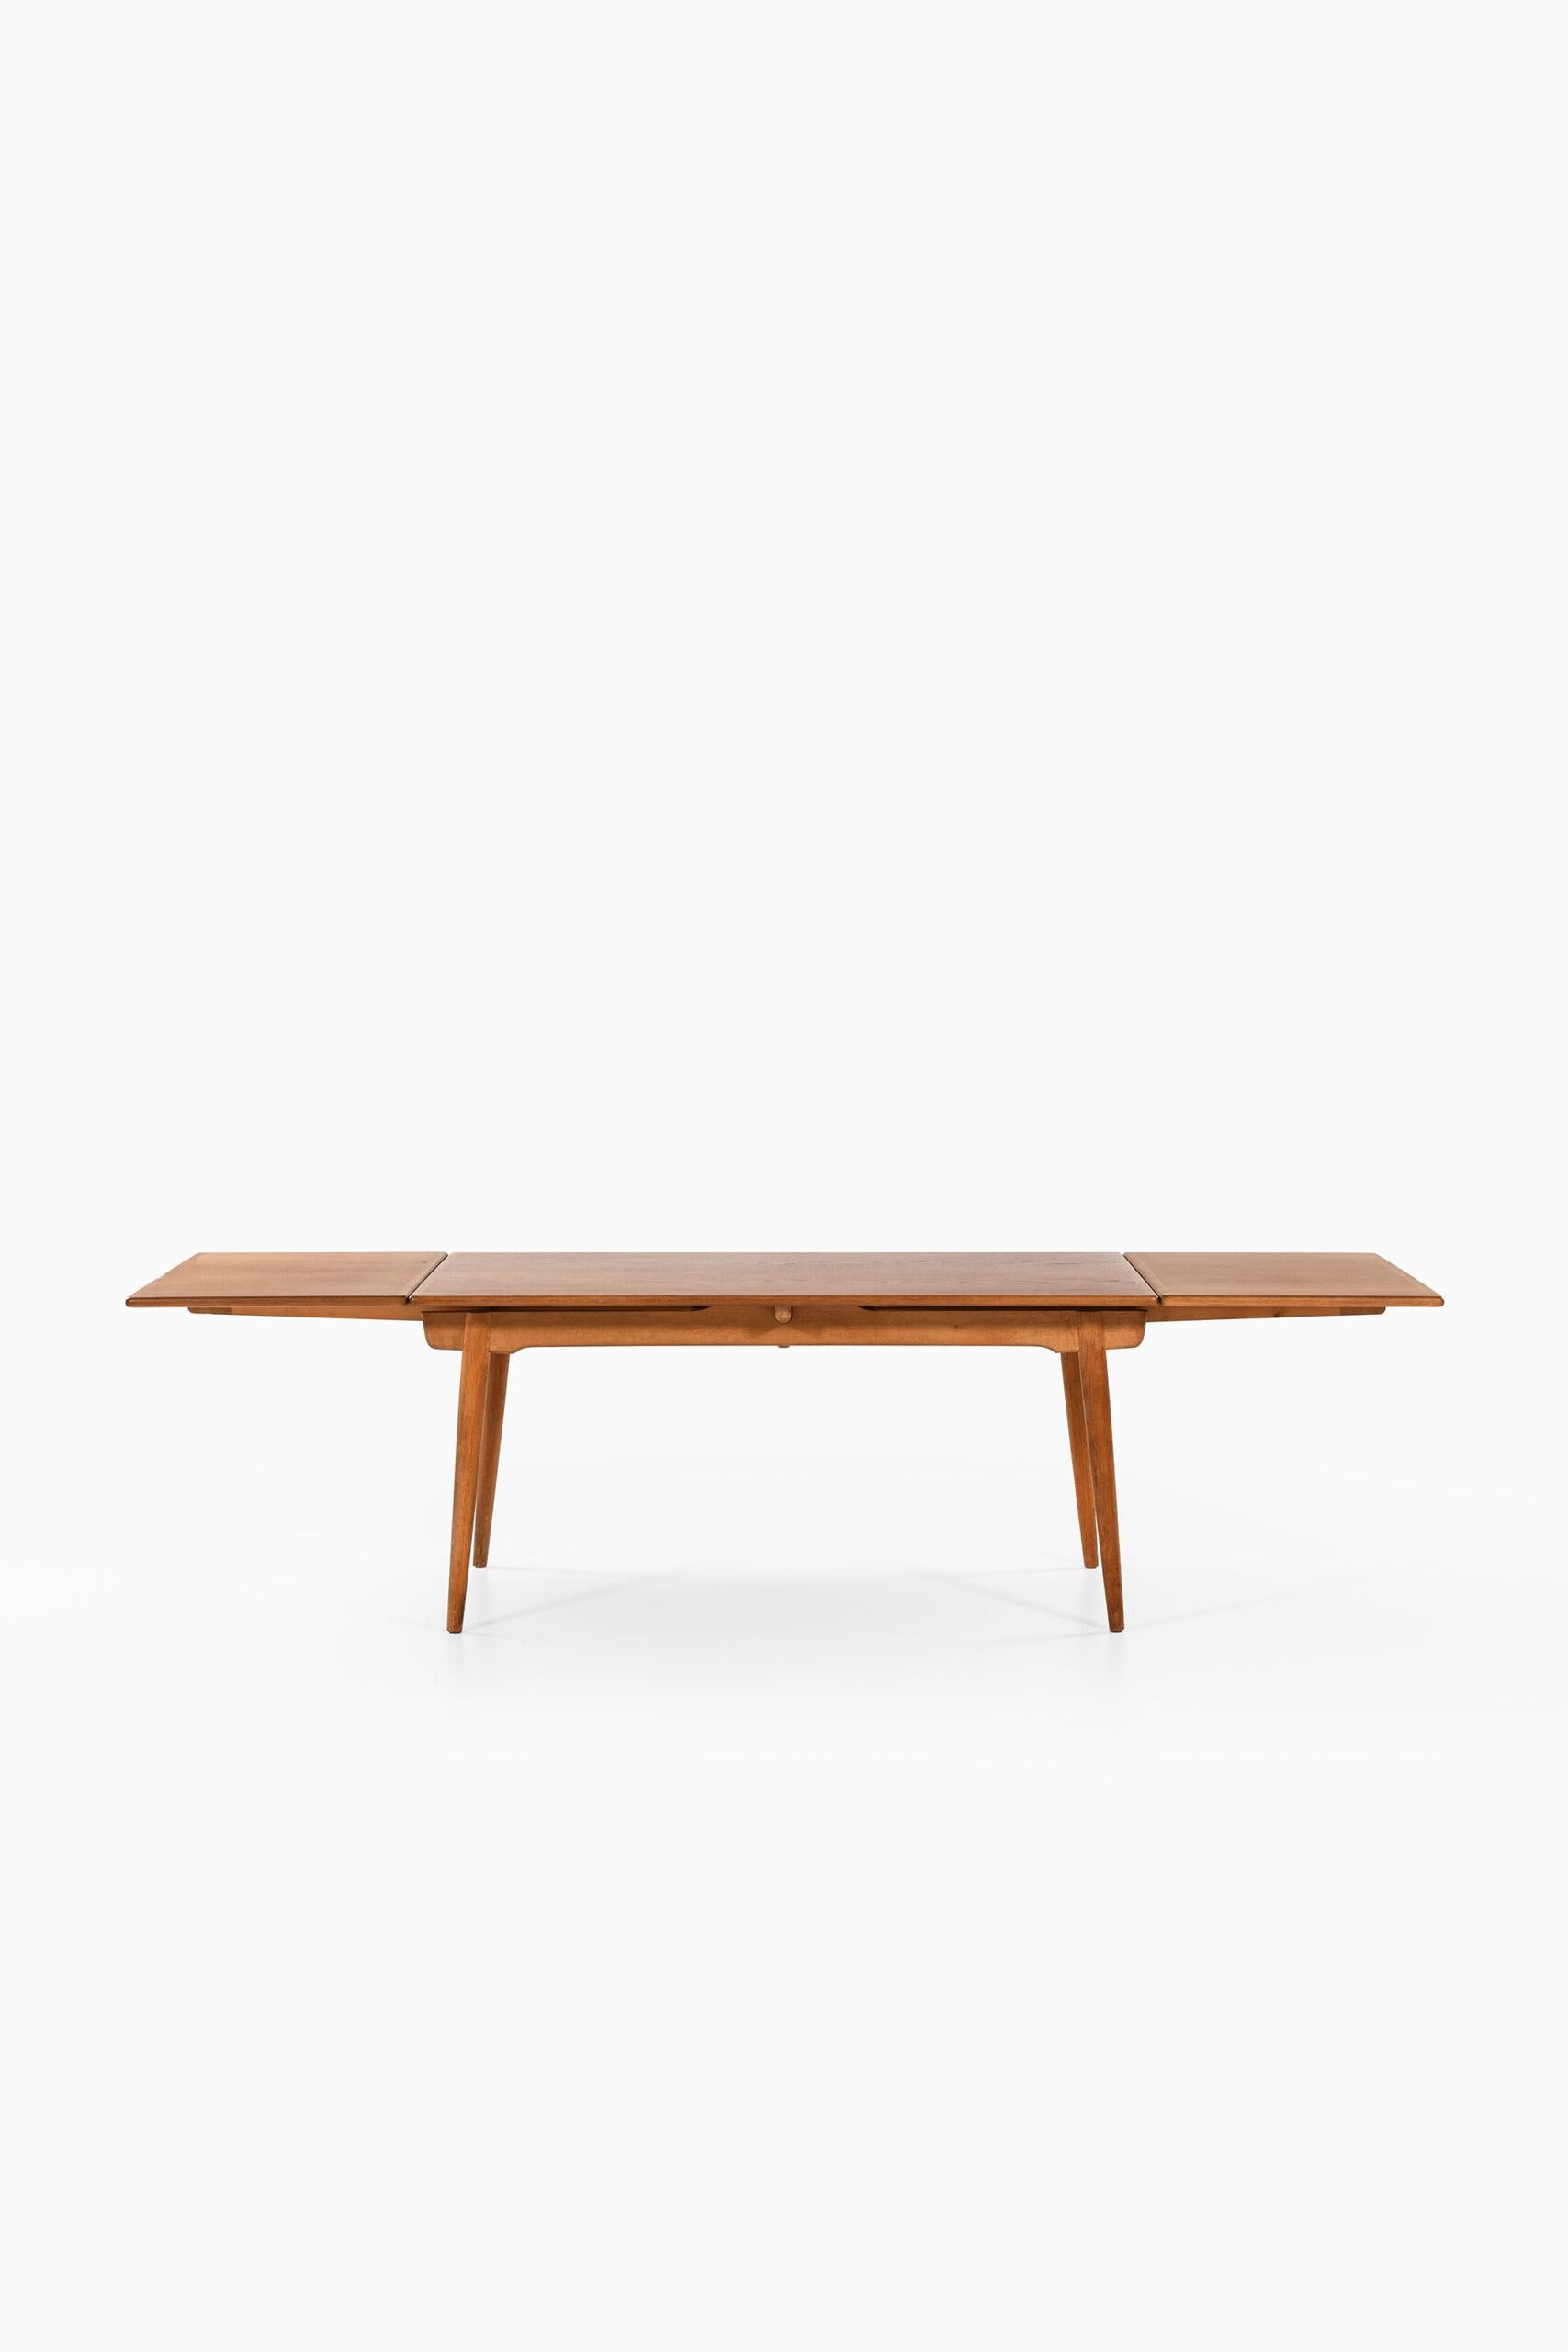 Danish Hans Wegner Dining Table Model AT-312 Produced by Andreas Tuck in Denmark For Sale